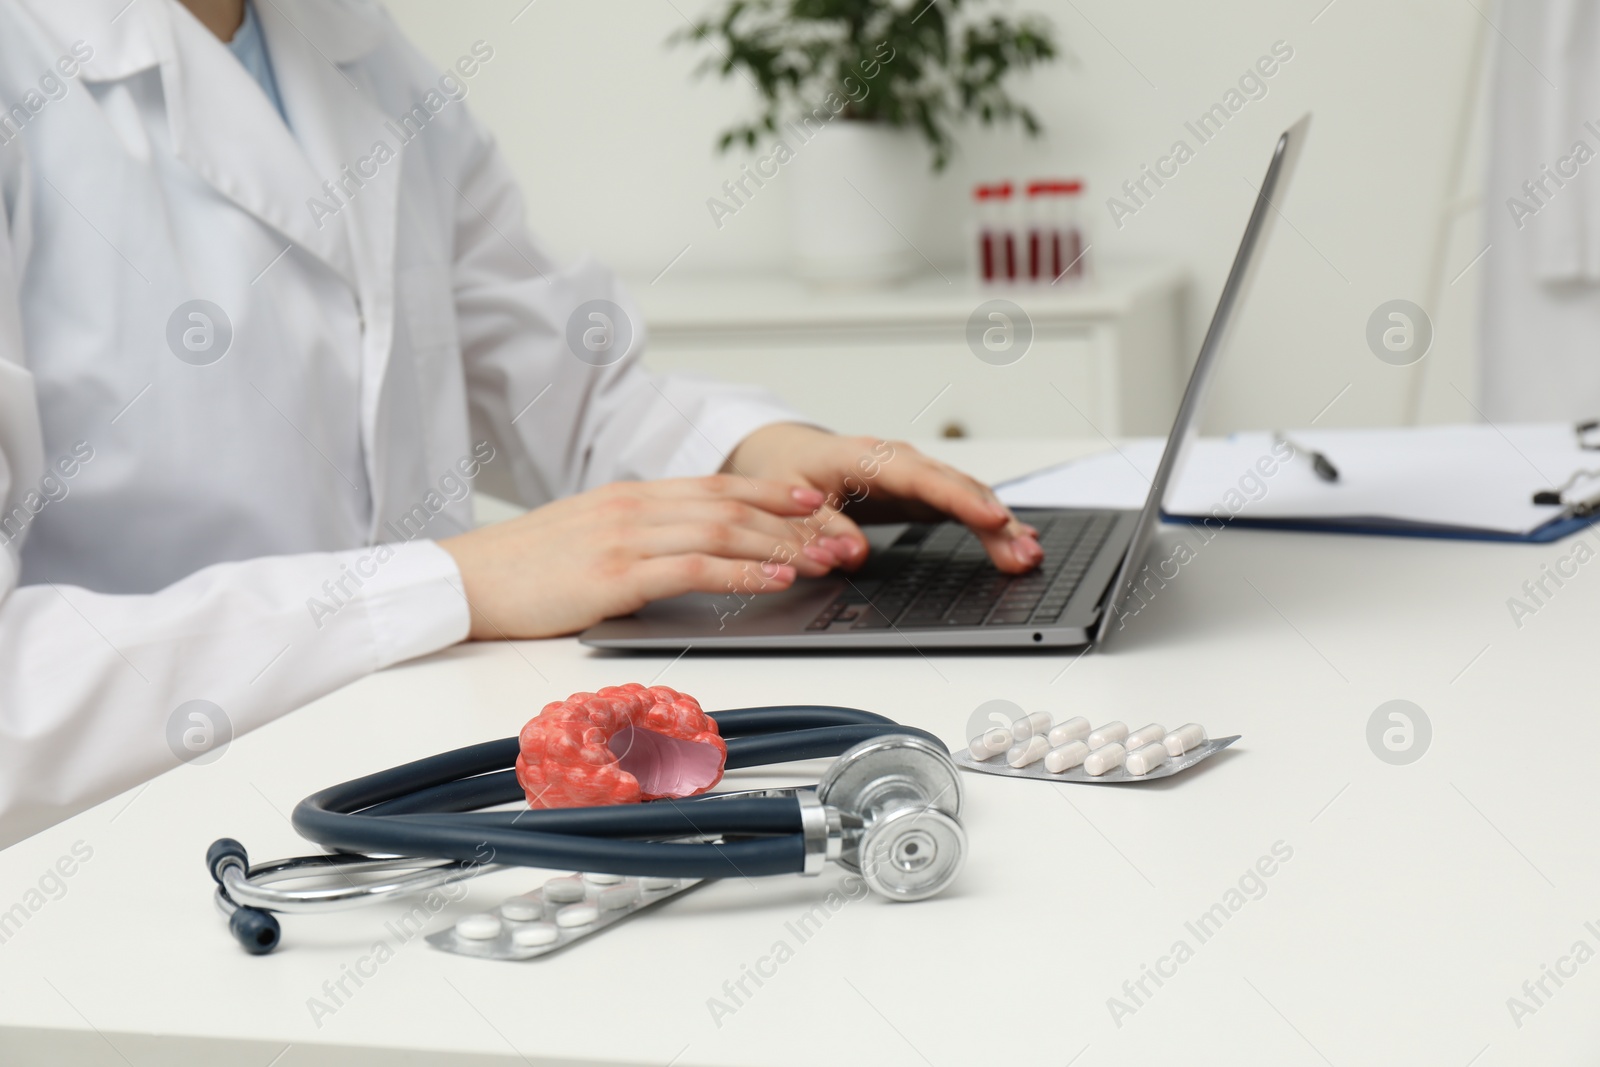 Photo of Endocrinologist working at table, focus on stethoscope and model of thyroid gland